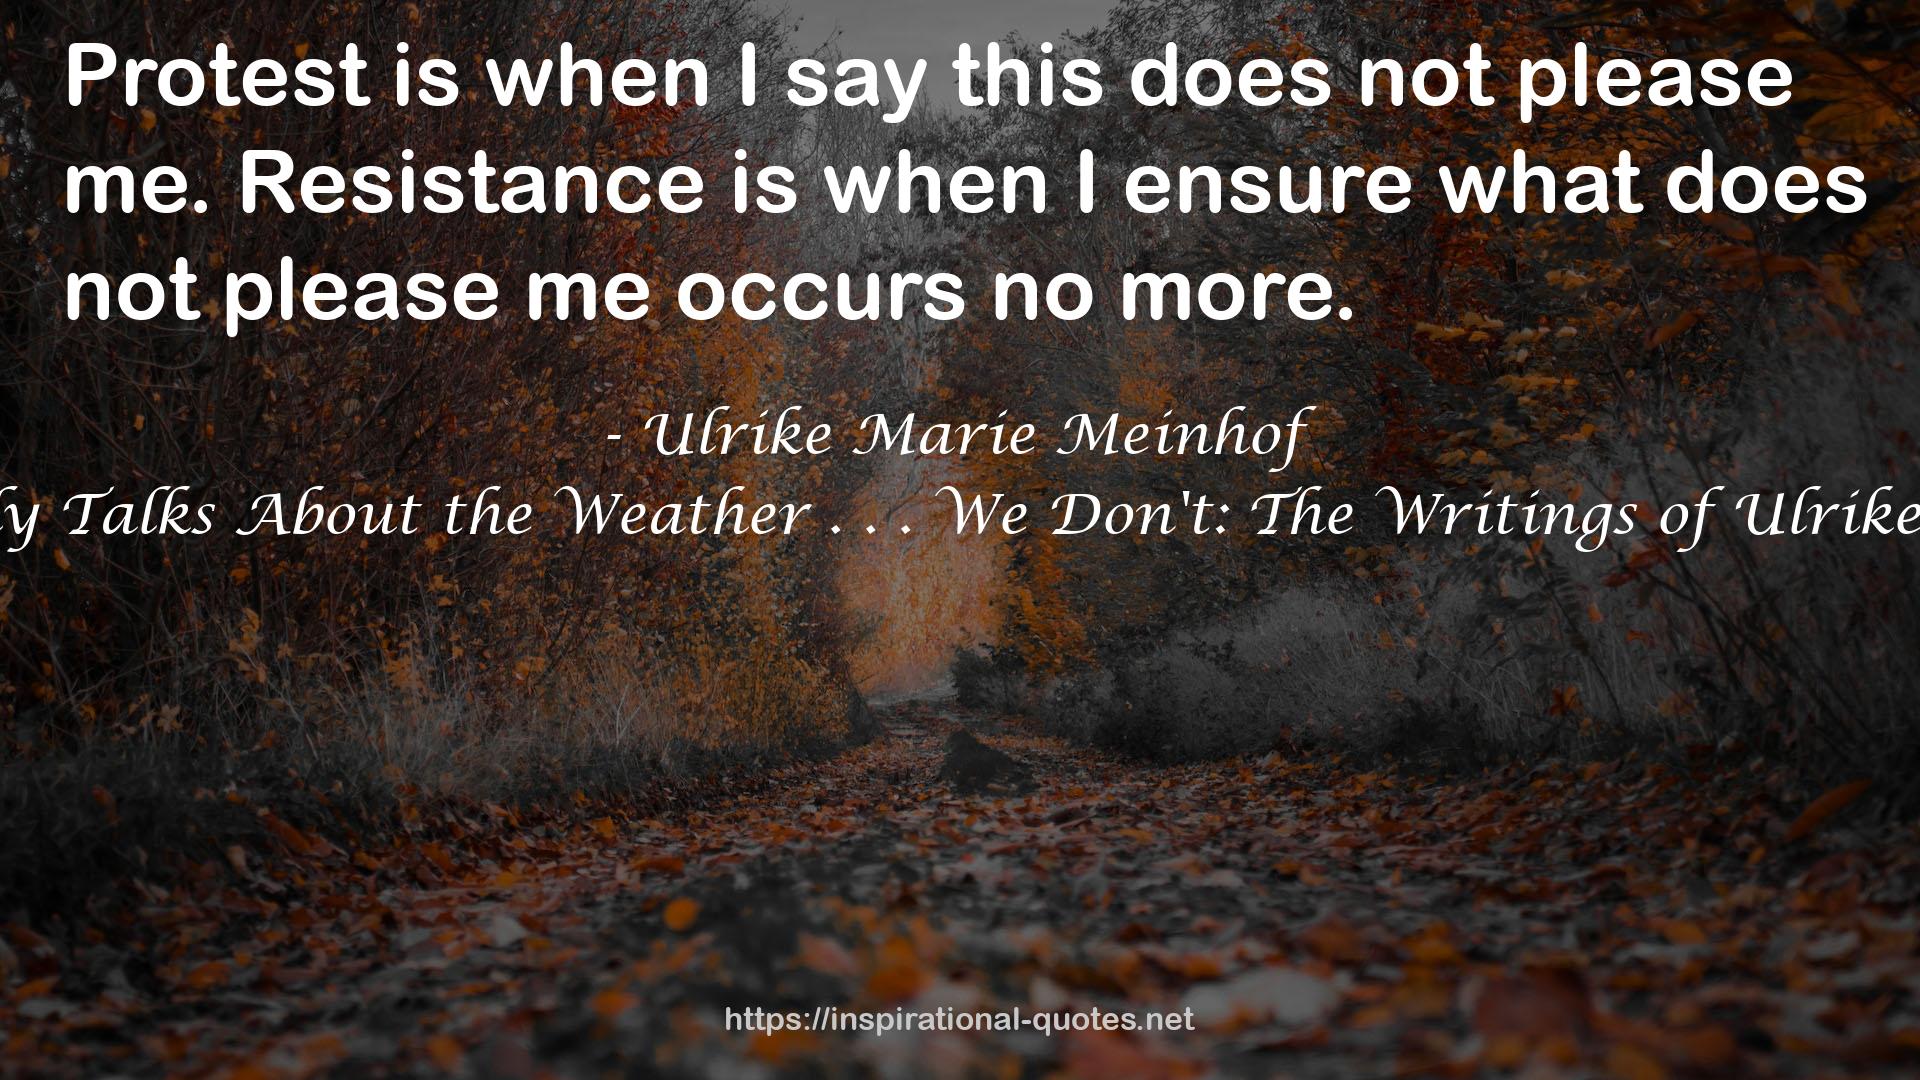 Everybody Talks About the Weather . . . We Don't: The Writings of Ulrike Meinhof QUOTES